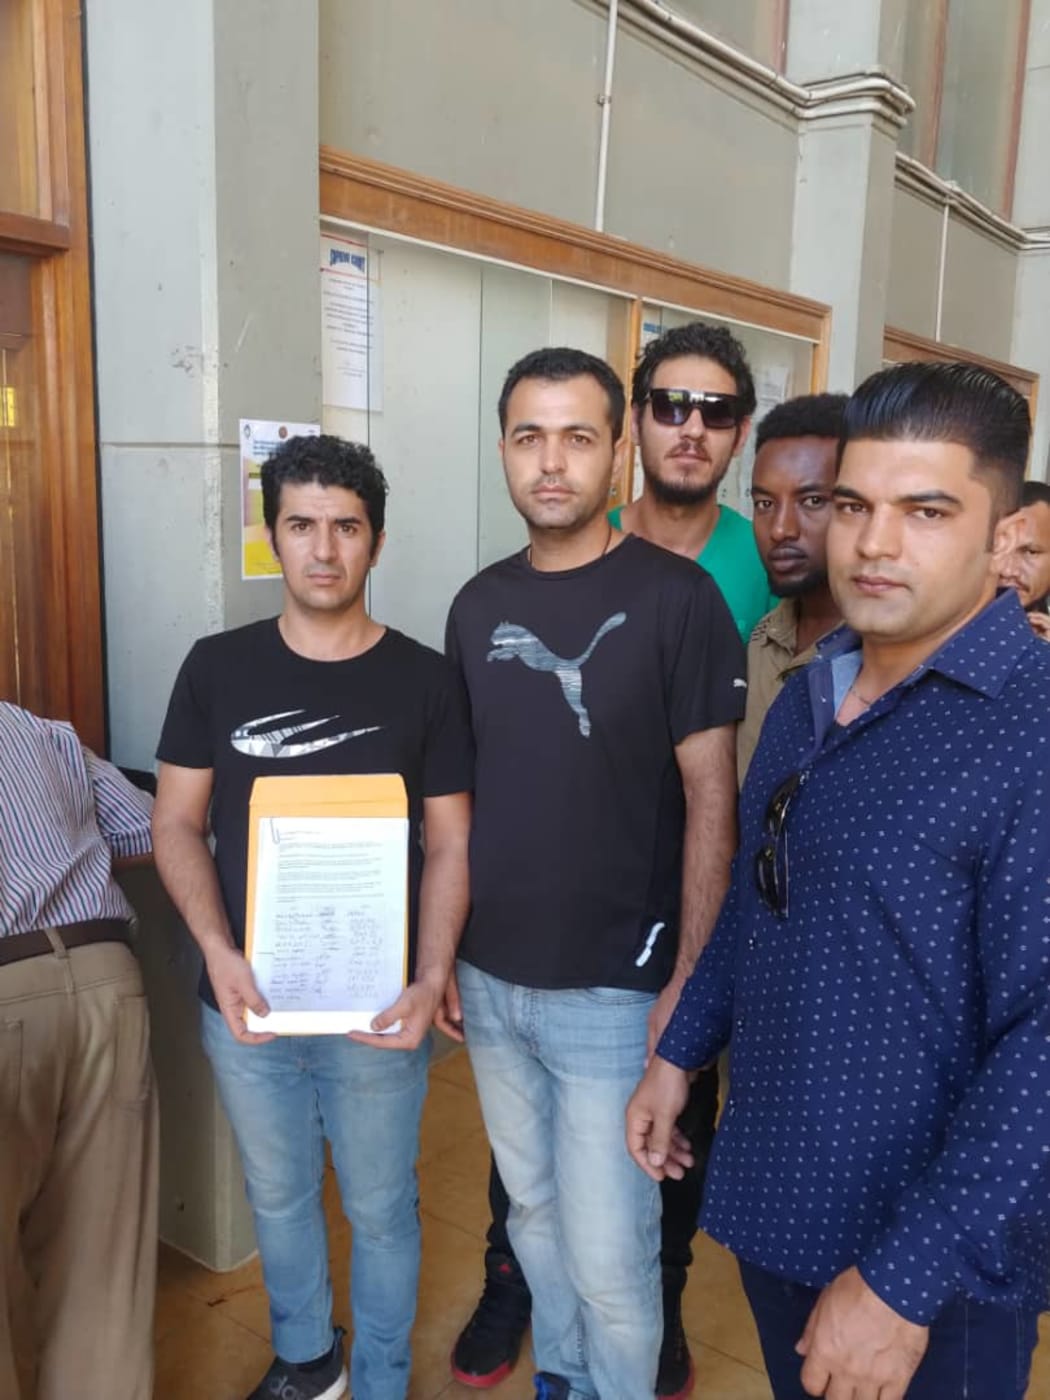 The Manus Island refuges deliver the petition to the PNG Supreme Court.